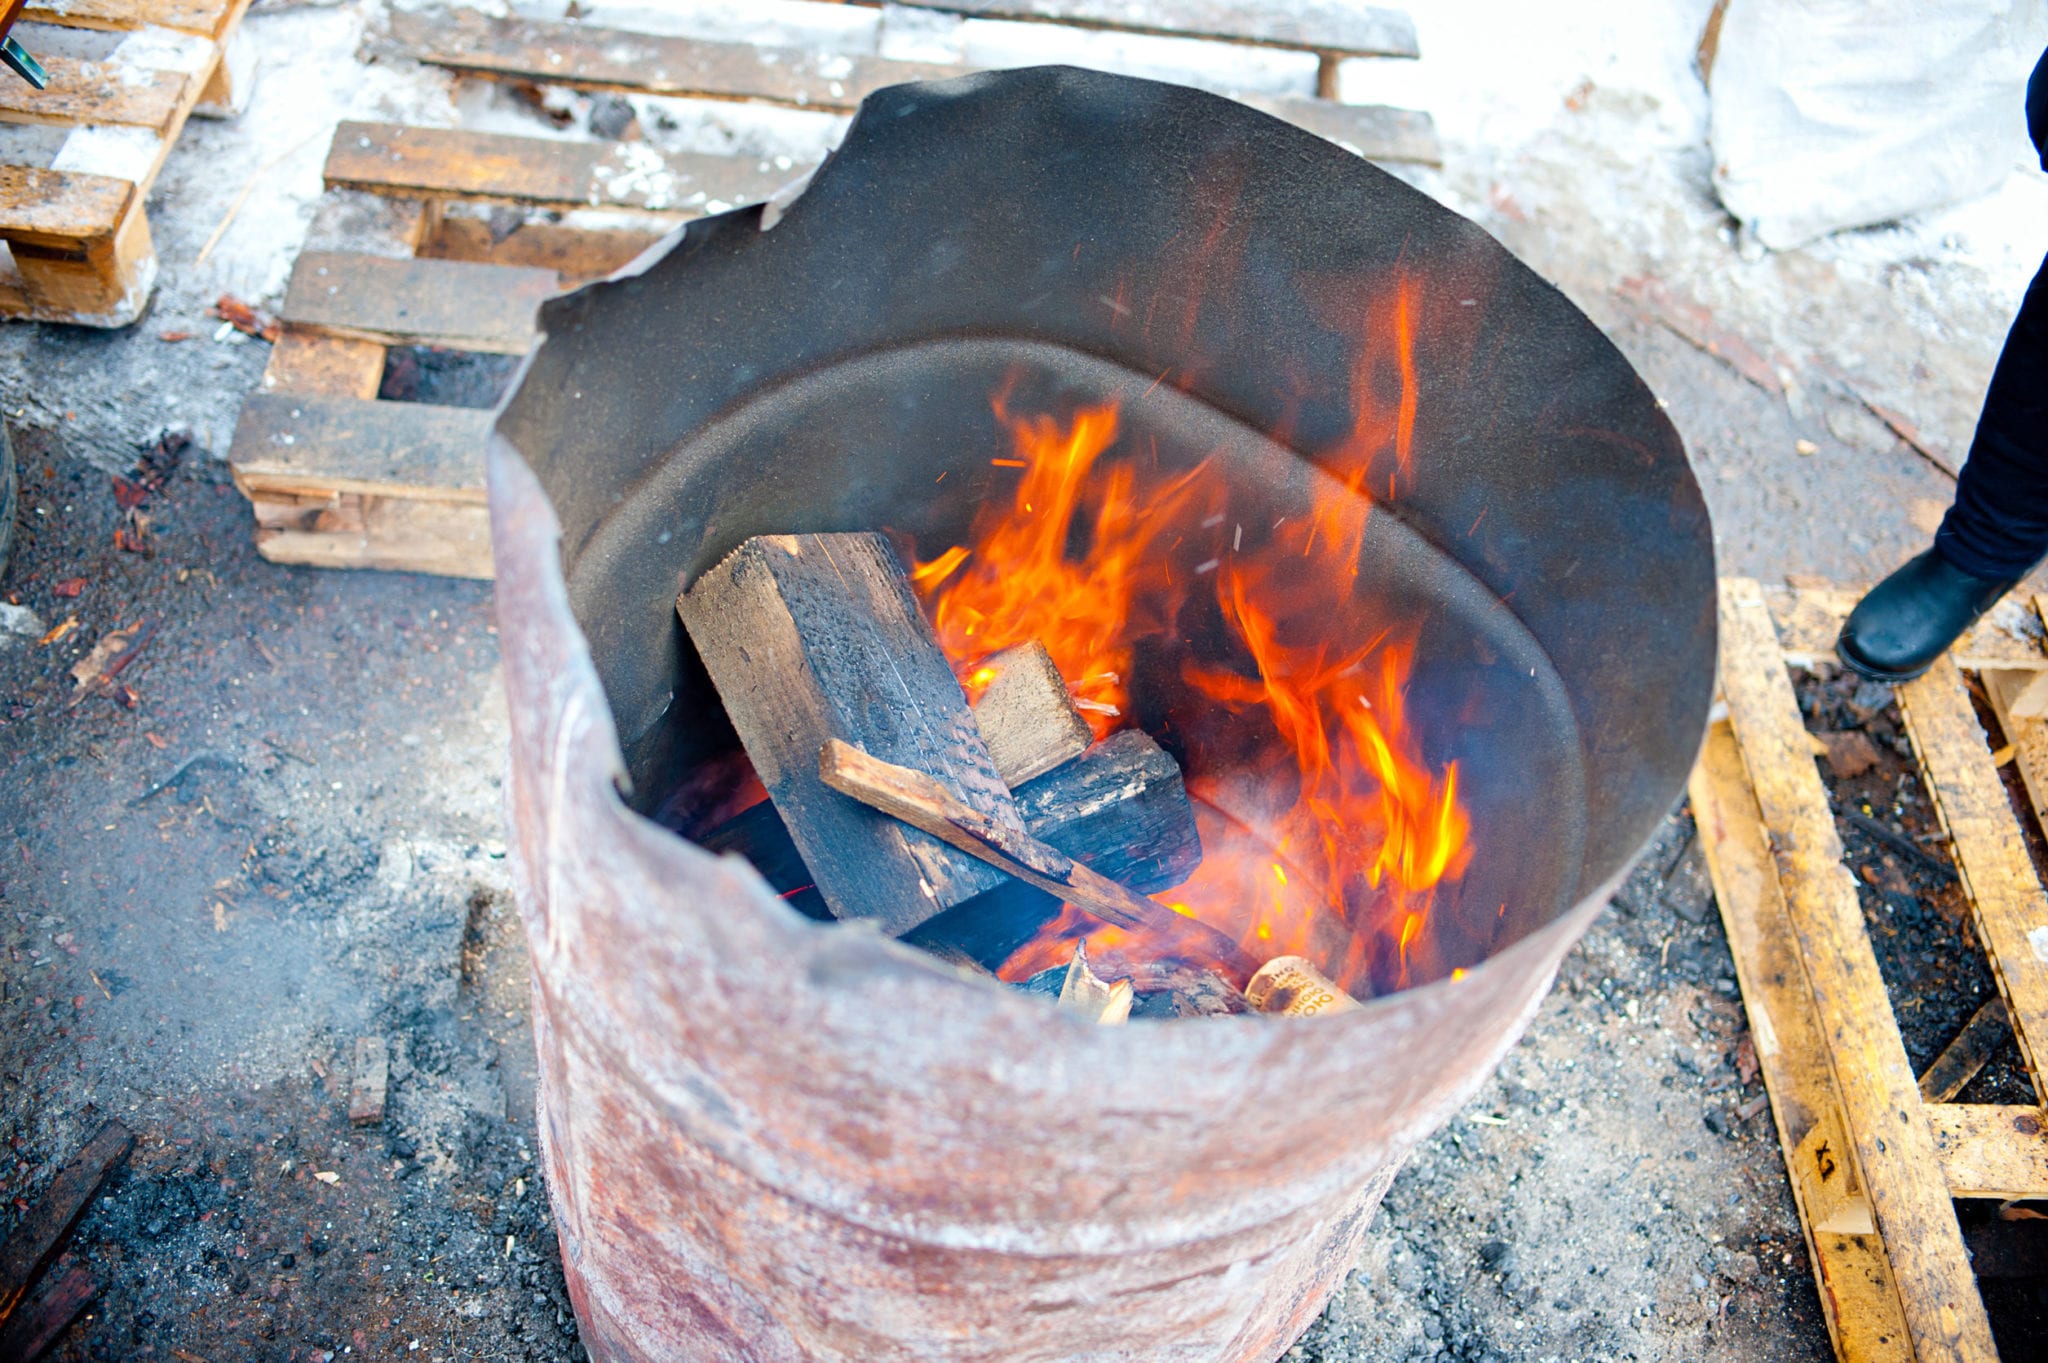 Bad Break-up? Think Twice About Burning an Ex's Old Things in MN